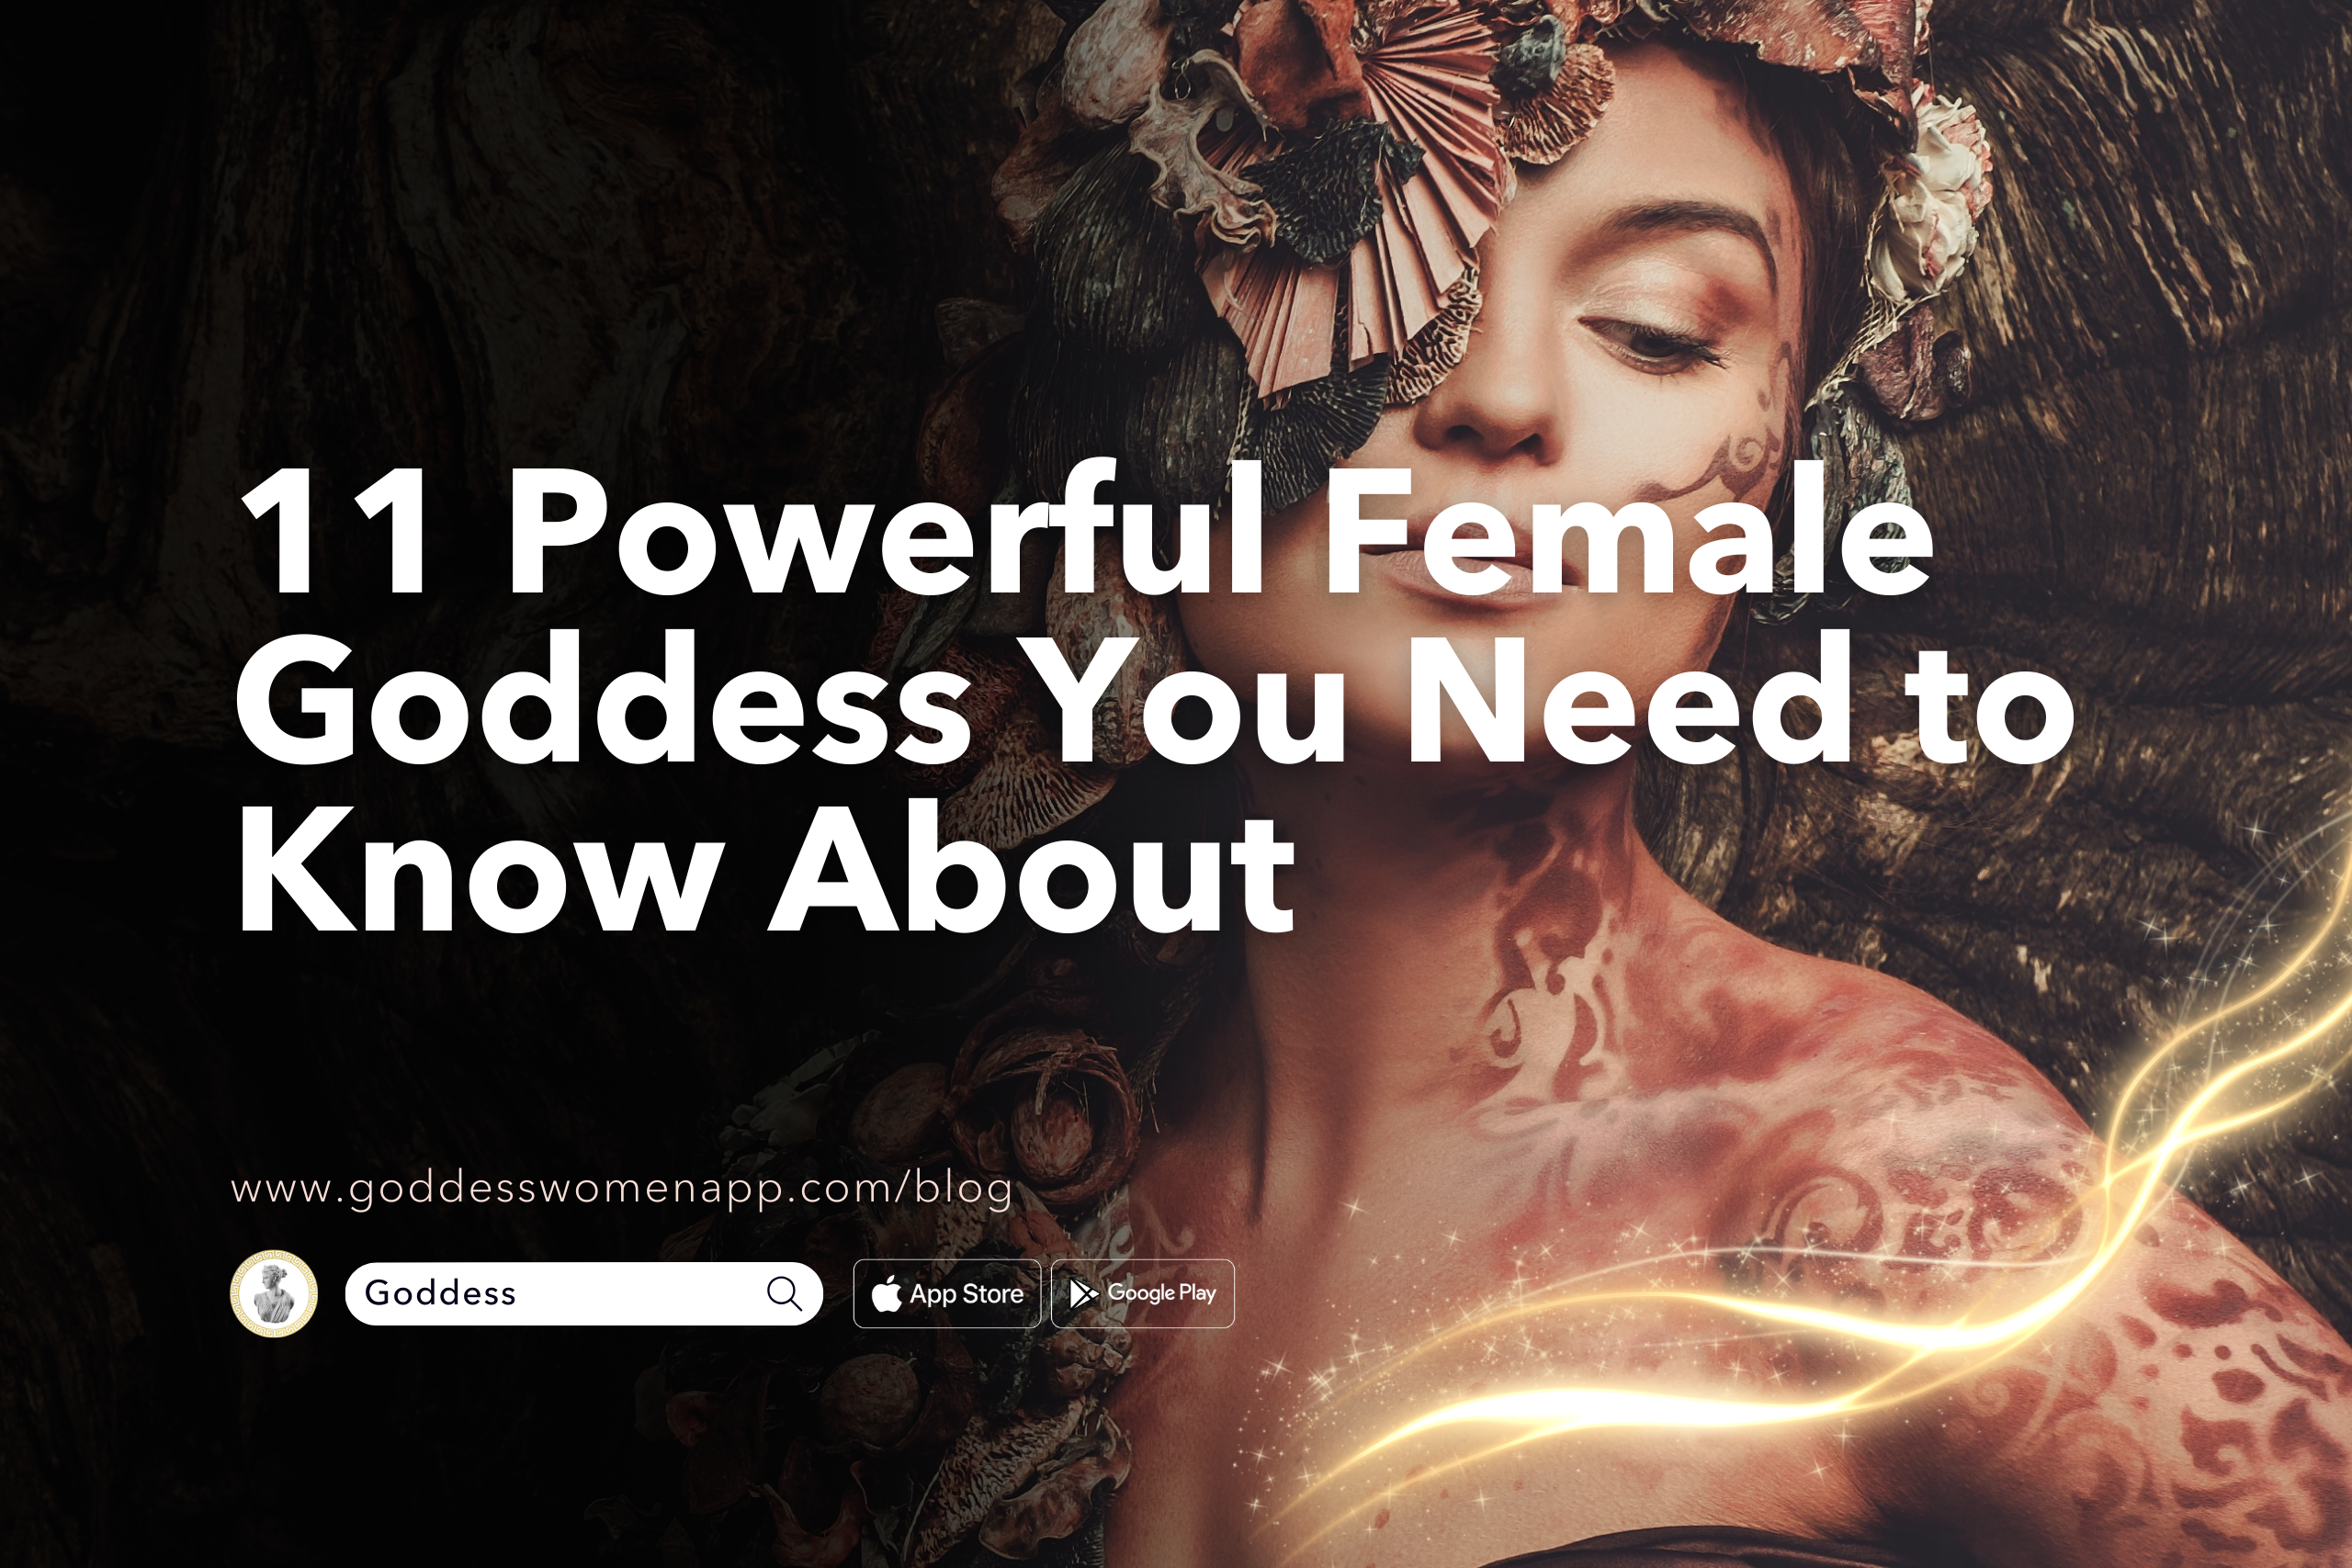 11 Powerful Female Goddess You Need to Know About